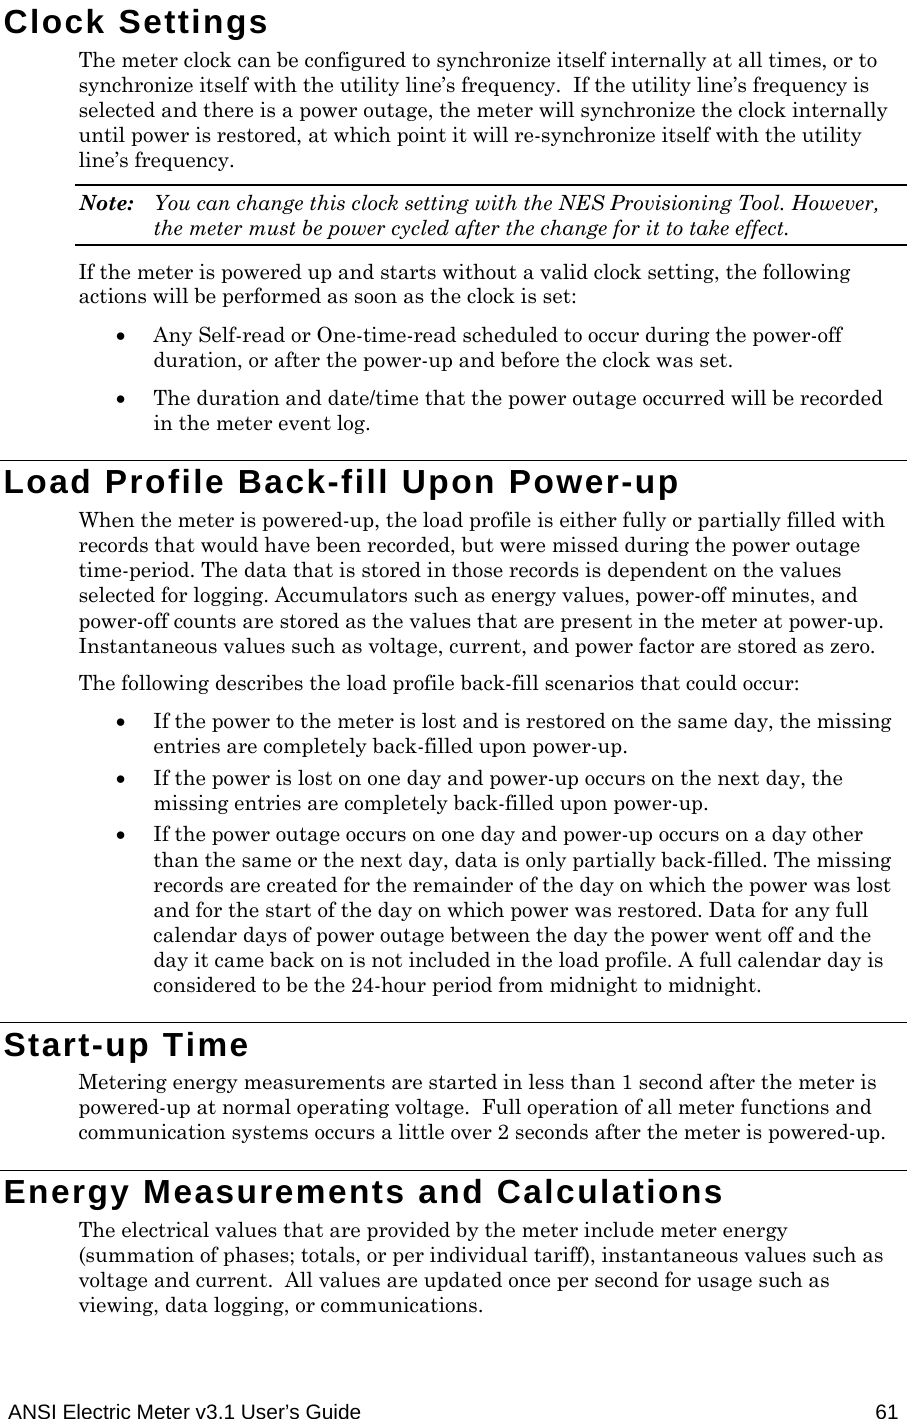  ANSI Electric Meter v3.1 User’s Guide  61 Clock Settings The meter clock can be configured to synchronize itself internally at all times, or to synchronize itself with the utility line’s frequency.  If the utility line’s frequency is selected and there is a power outage, the meter will synchronize the clock internally until power is restored, at which point it will re-synchronize itself with the utility line’s frequency. Note:  You can change this clock setting with the NES Provisioning Tool. However, the meter must be power cycled after the change for it to take effect. If the meter is powered up and starts without a valid clock setting, the following actions will be performed as soon as the clock is set:  Any Self-read or One-time-read scheduled to occur during the power-off duration, or after the power-up and before the clock was set.  The duration and date/time that the power outage occurred will be recorded in the meter event log. Load Profile Back-fill Upon Power-up When the meter is powered-up, the load profile is either fully or partially filled with records that would have been recorded, but were missed during the power outage time-period. The data that is stored in those records is dependent on the values selected for logging. Accumulators such as energy values, power-off minutes, and power-off counts are stored as the values that are present in the meter at power-up. Instantaneous values such as voltage, current, and power factor are stored as zero. The following describes the load profile back-fill scenarios that could occur:  If the power to the meter is lost and is restored on the same day, the missing entries are completely back-filled upon power-up.  If the power is lost on one day and power-up occurs on the next day, the missing entries are completely back-filled upon power-up.  If the power outage occurs on one day and power-up occurs on a day other than the same or the next day, data is only partially back-filled. The missing records are created for the remainder of the day on which the power was lost and for the start of the day on which power was restored. Data for any full calendar days of power outage between the day the power went off and the day it came back on is not included in the load profile. A full calendar day is considered to be the 24-hour period from midnight to midnight. Start-up Time Metering energy measurements are started in less than 1 second after the meter is powered-up at normal operating voltage.  Full operation of all meter functions and communication systems occurs a little over 2 seconds after the meter is powered-up.   Energy Measurements and Calculations The electrical values that are provided by the meter include meter energy (summation of phases; totals, or per individual tariff), instantaneous values such as voltage and current.  All values are updated once per second for usage such as viewing, data logging, or communications. 